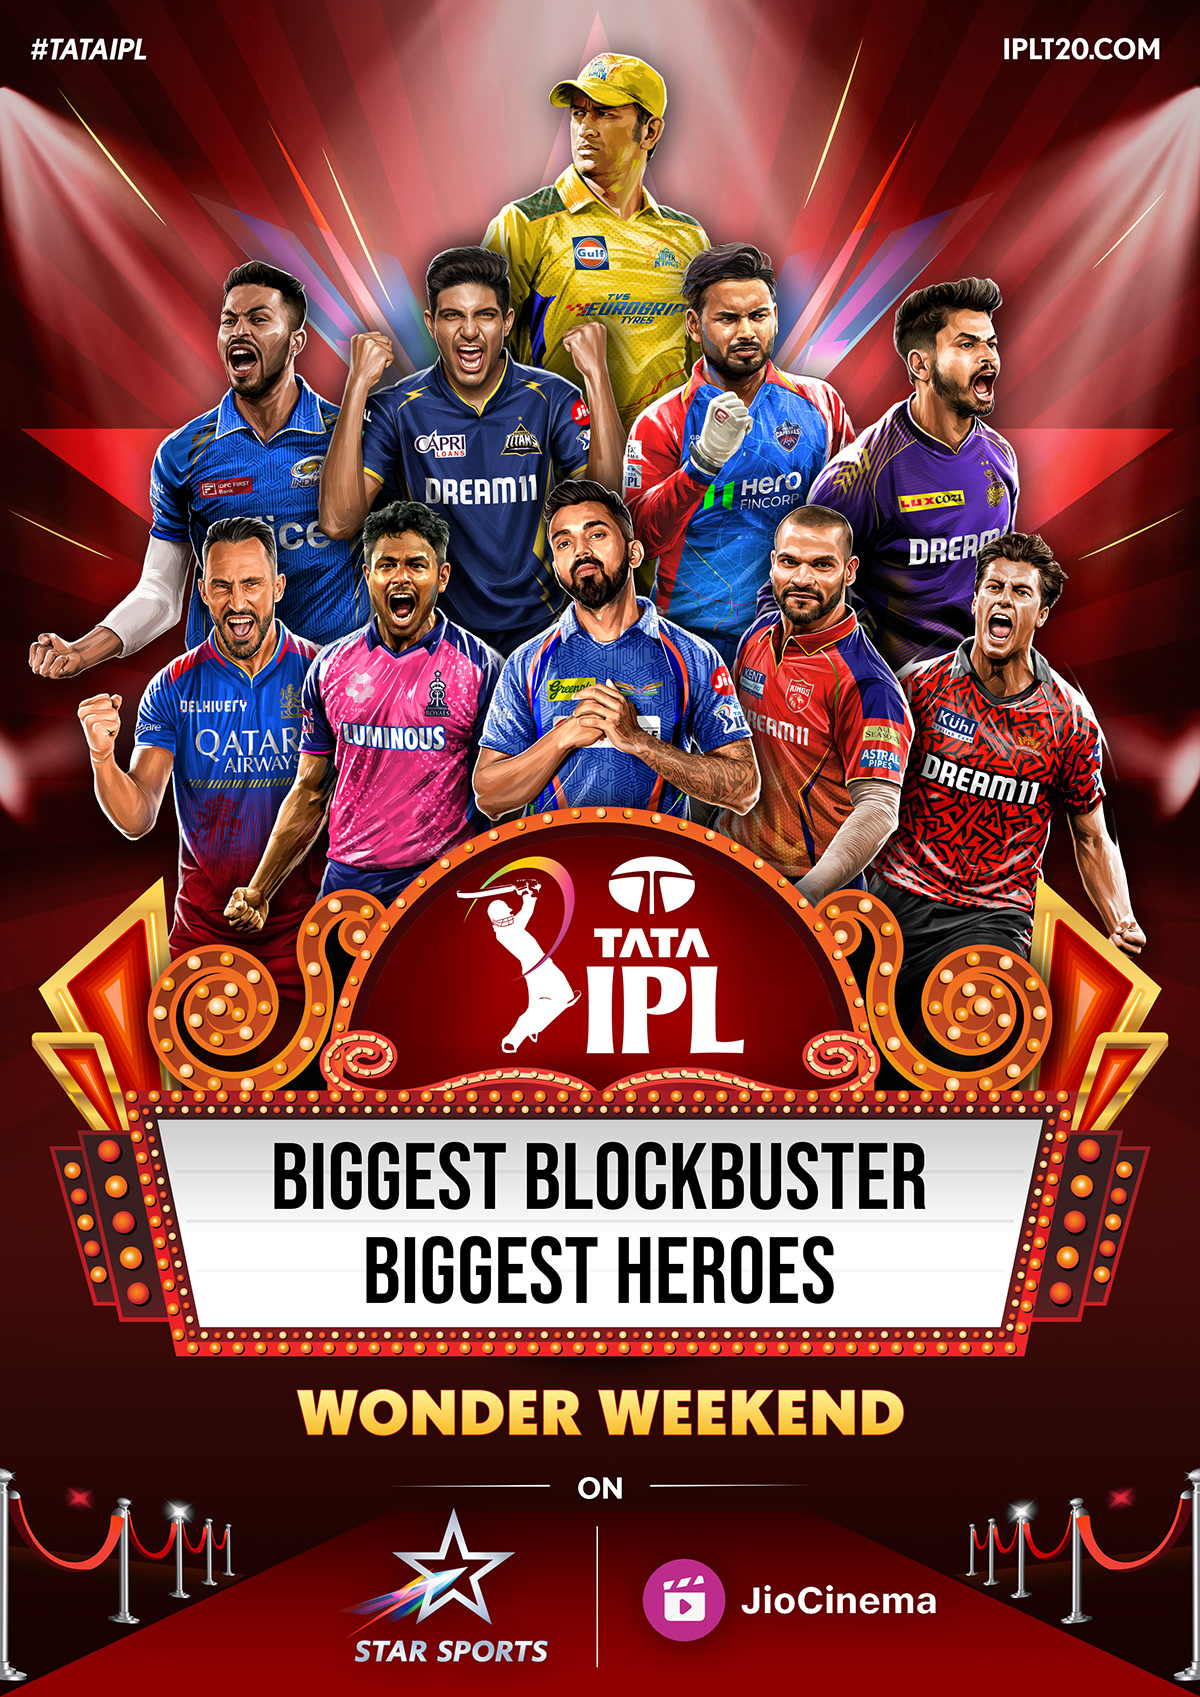 This layout showcase the grandness of IPL. The league is the biggest blockbuster in the world.